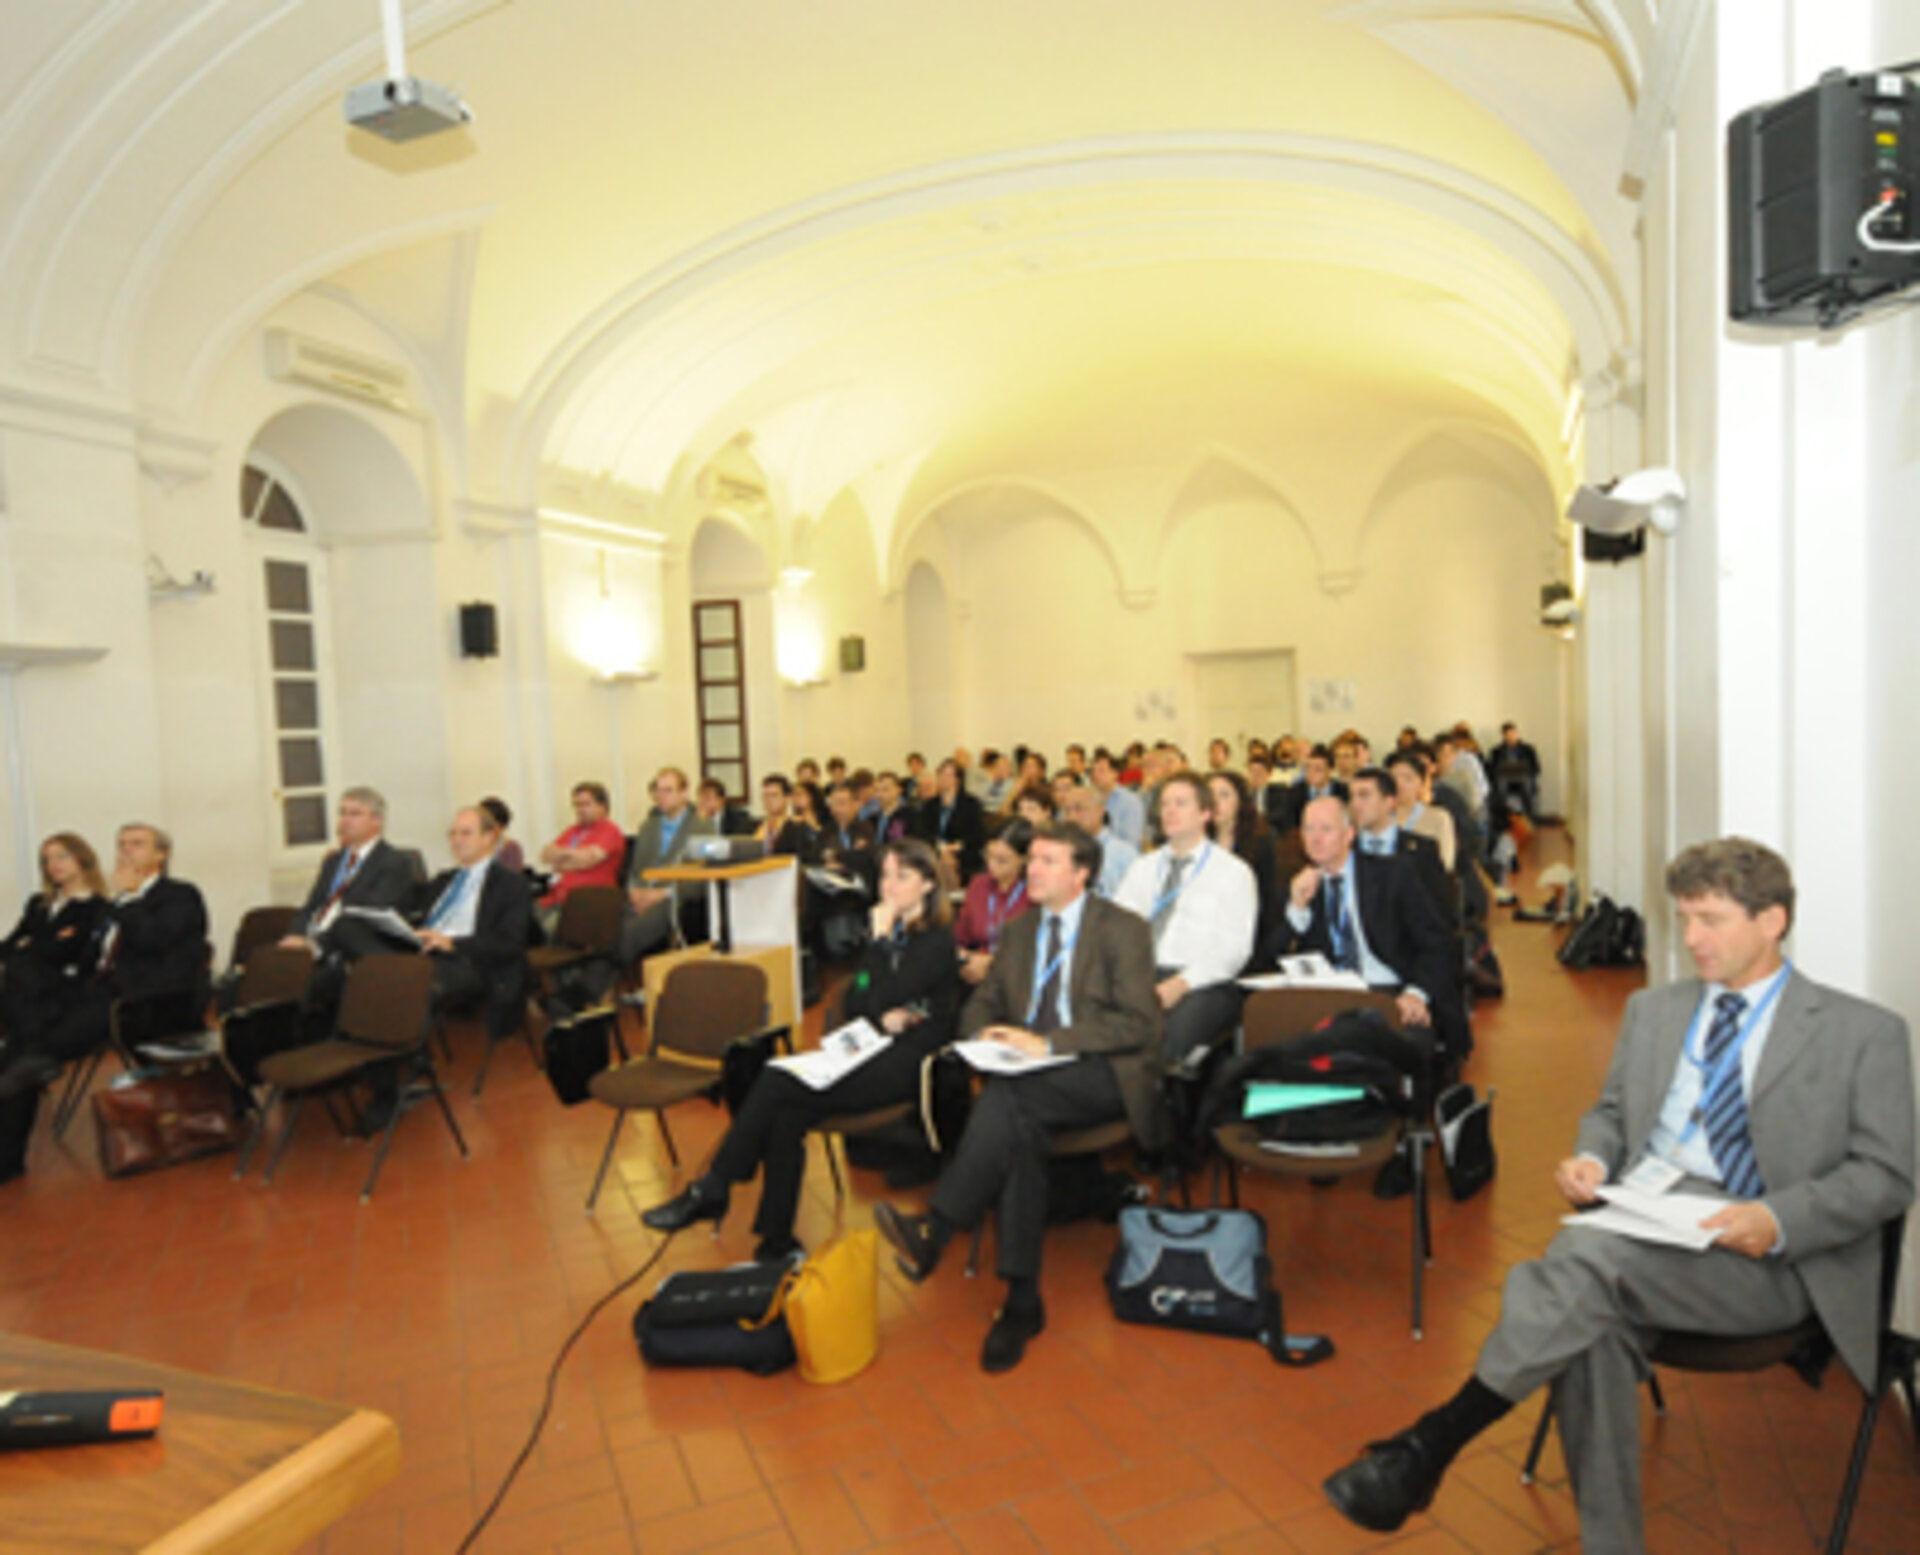 Presentation in the Aula Magna